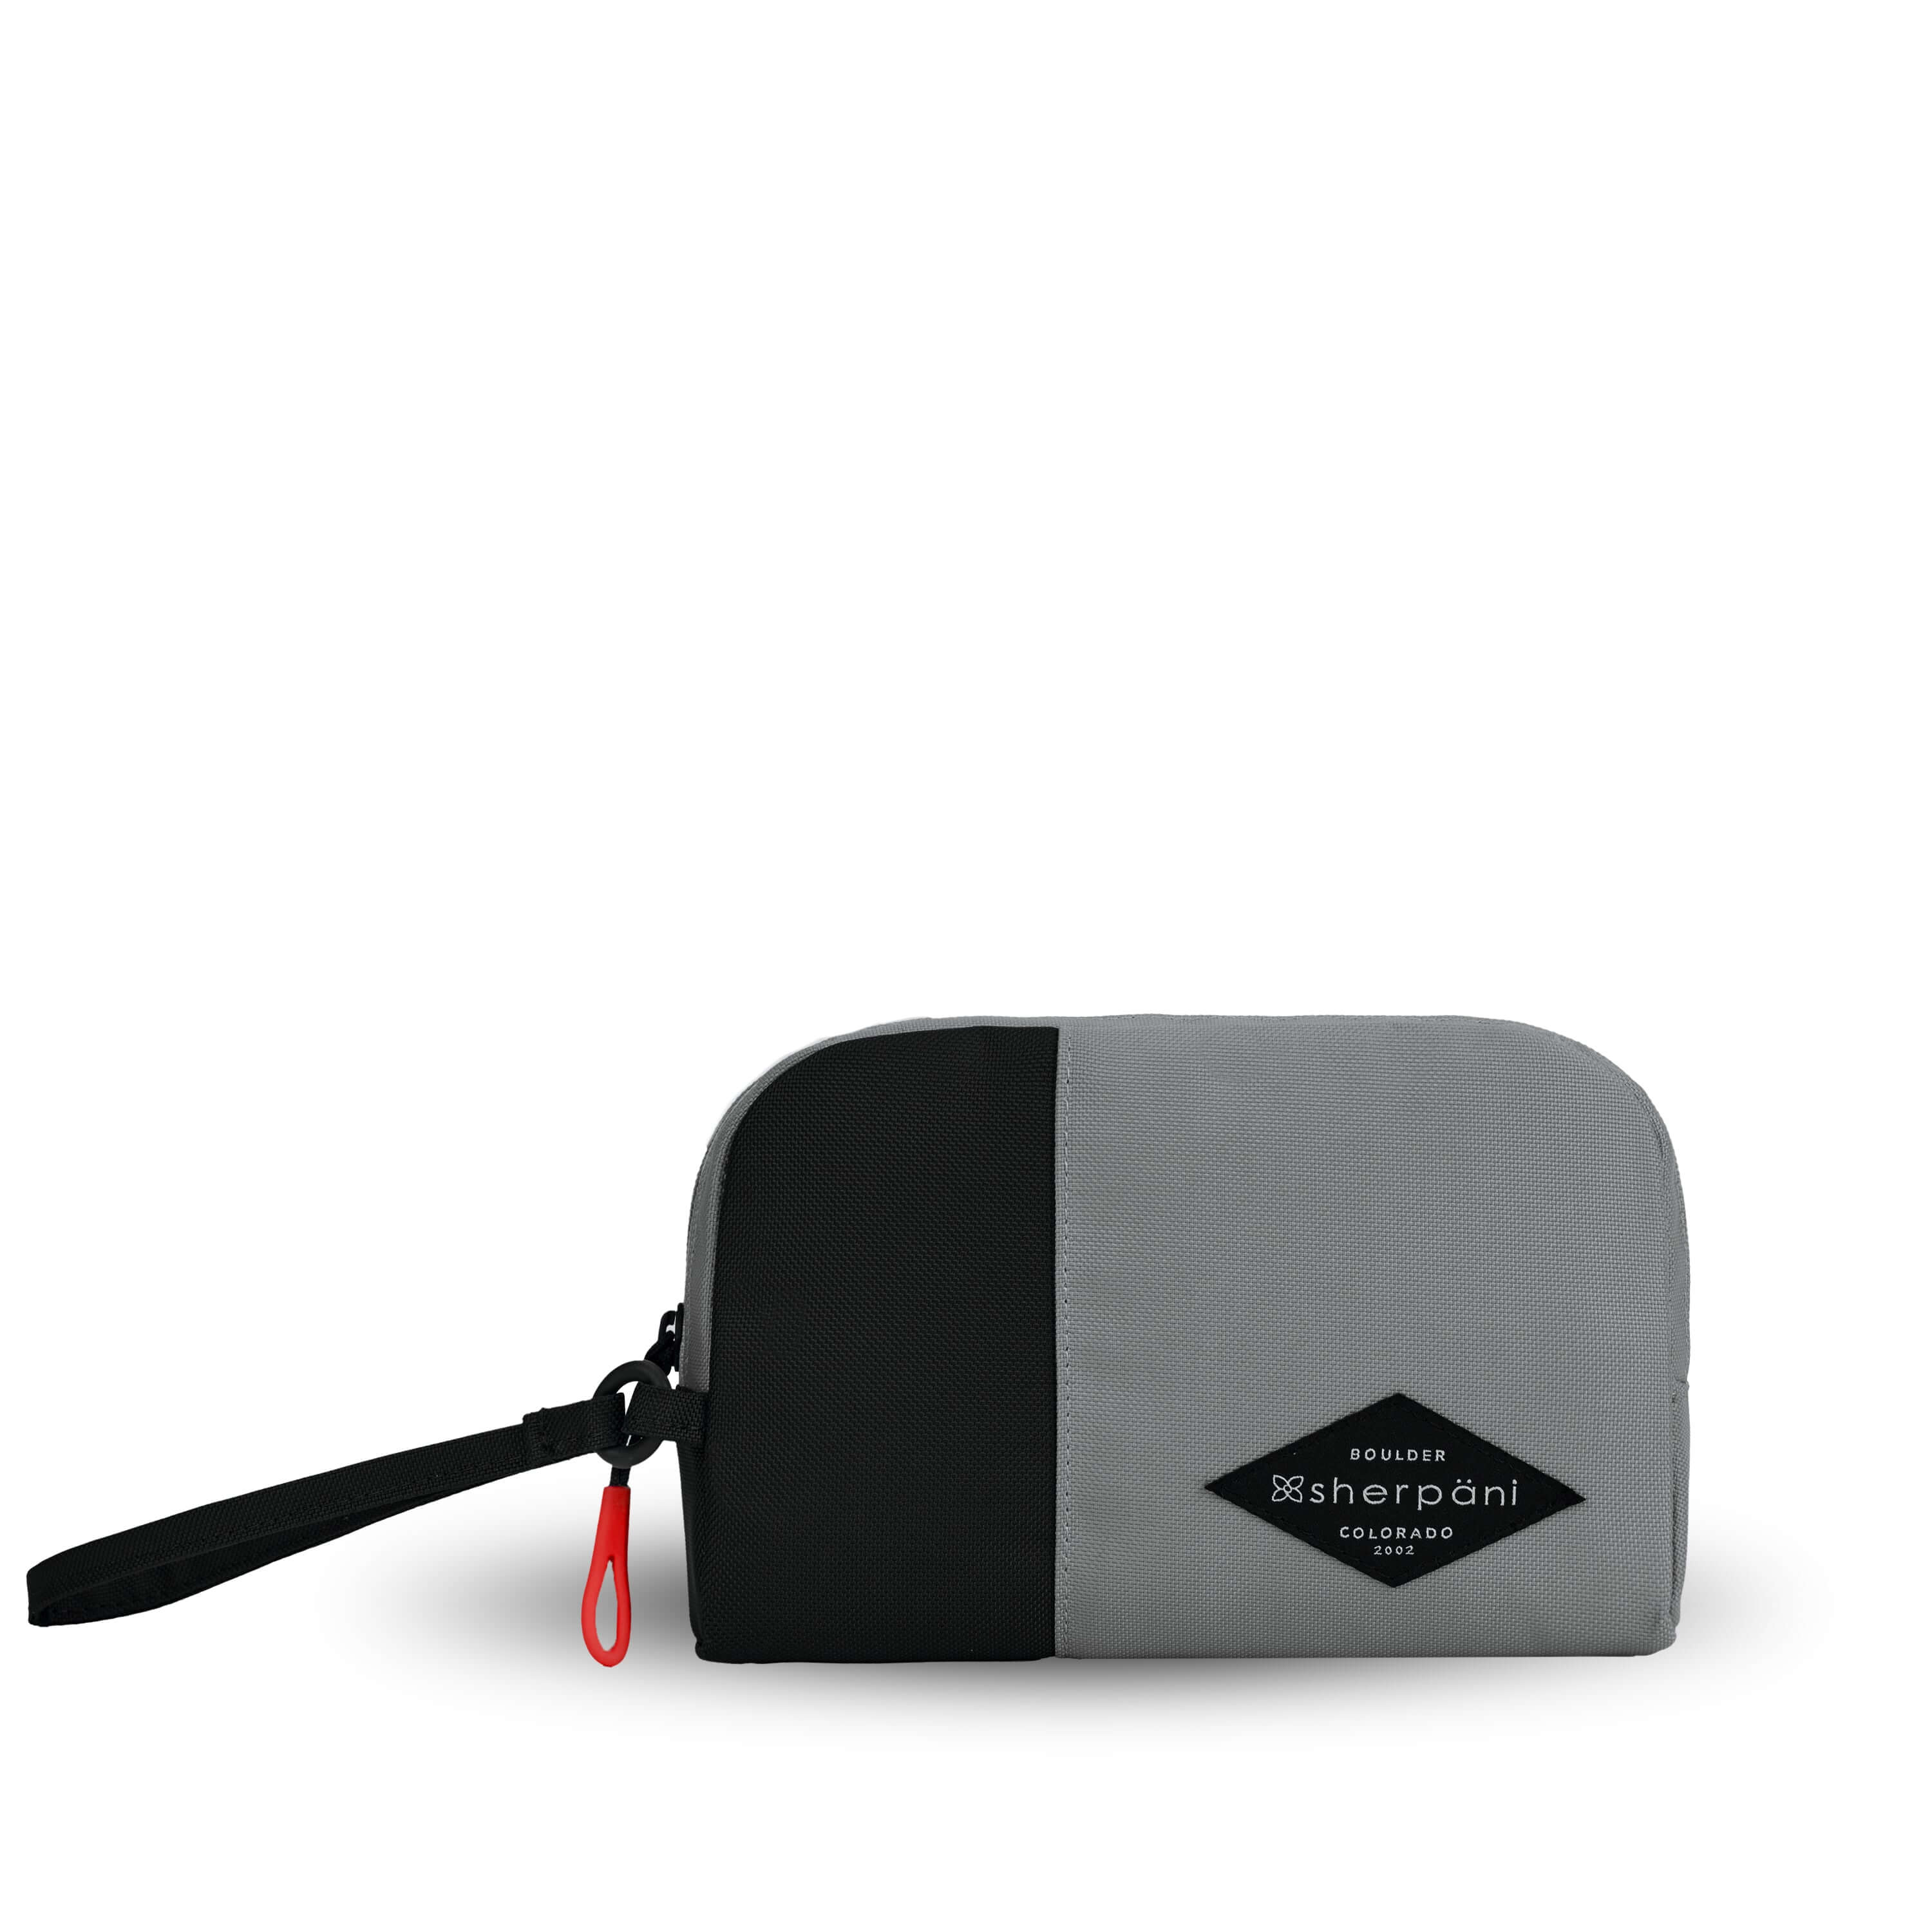 Flat front view of Sherpani travel accessory, the Jolie in Stone, in small size. The pouch is two-toned in gray and black. It features a black wristlet strap and an easy-pull zipper accented in red.